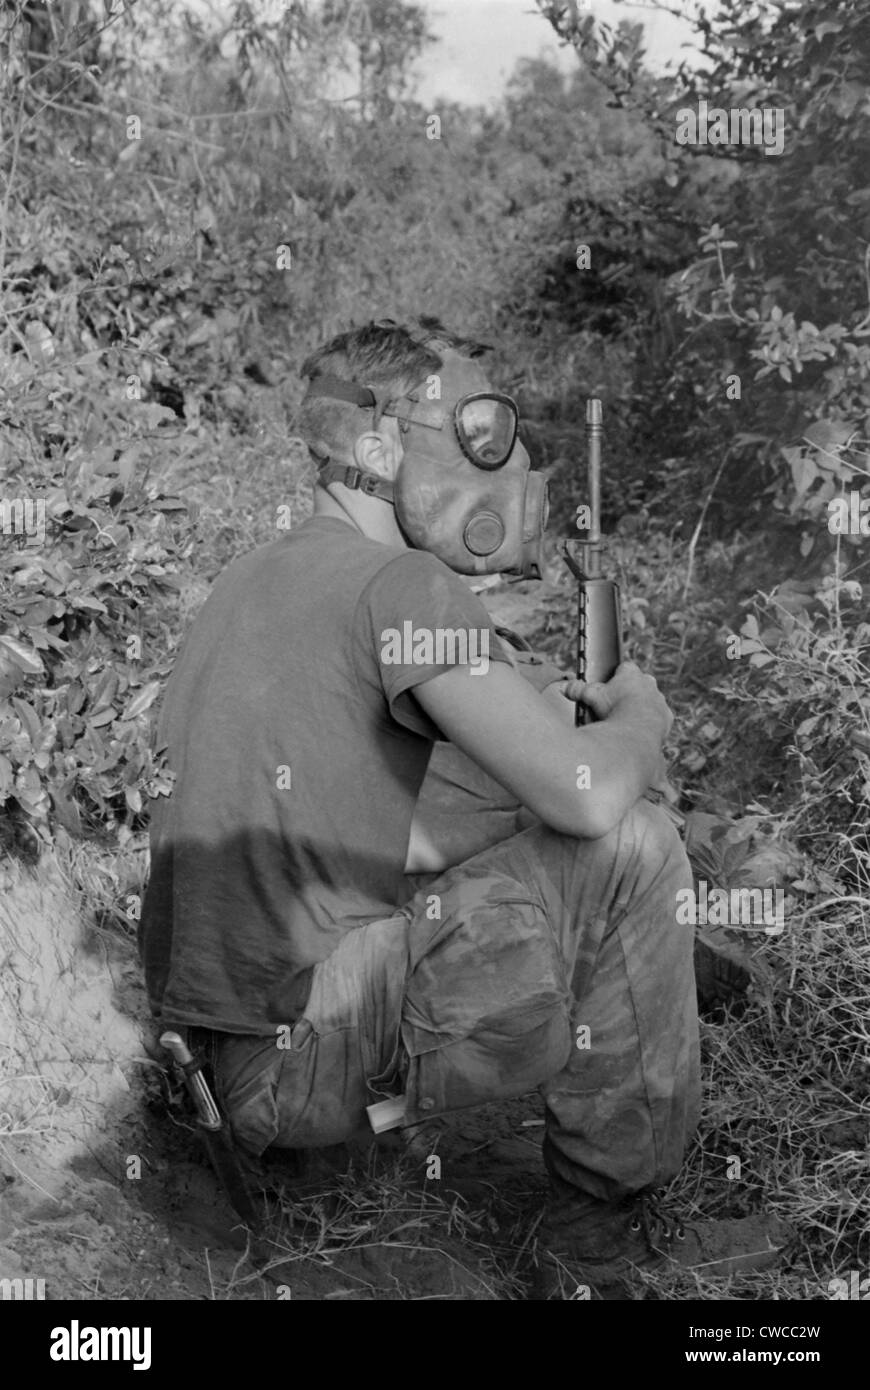 Vietnam War. US Marine wearing gas mask while waiting to enter a Viet Cong tunnel 22 miles south of DaNang, Vietnam. 1968. Stock Photo